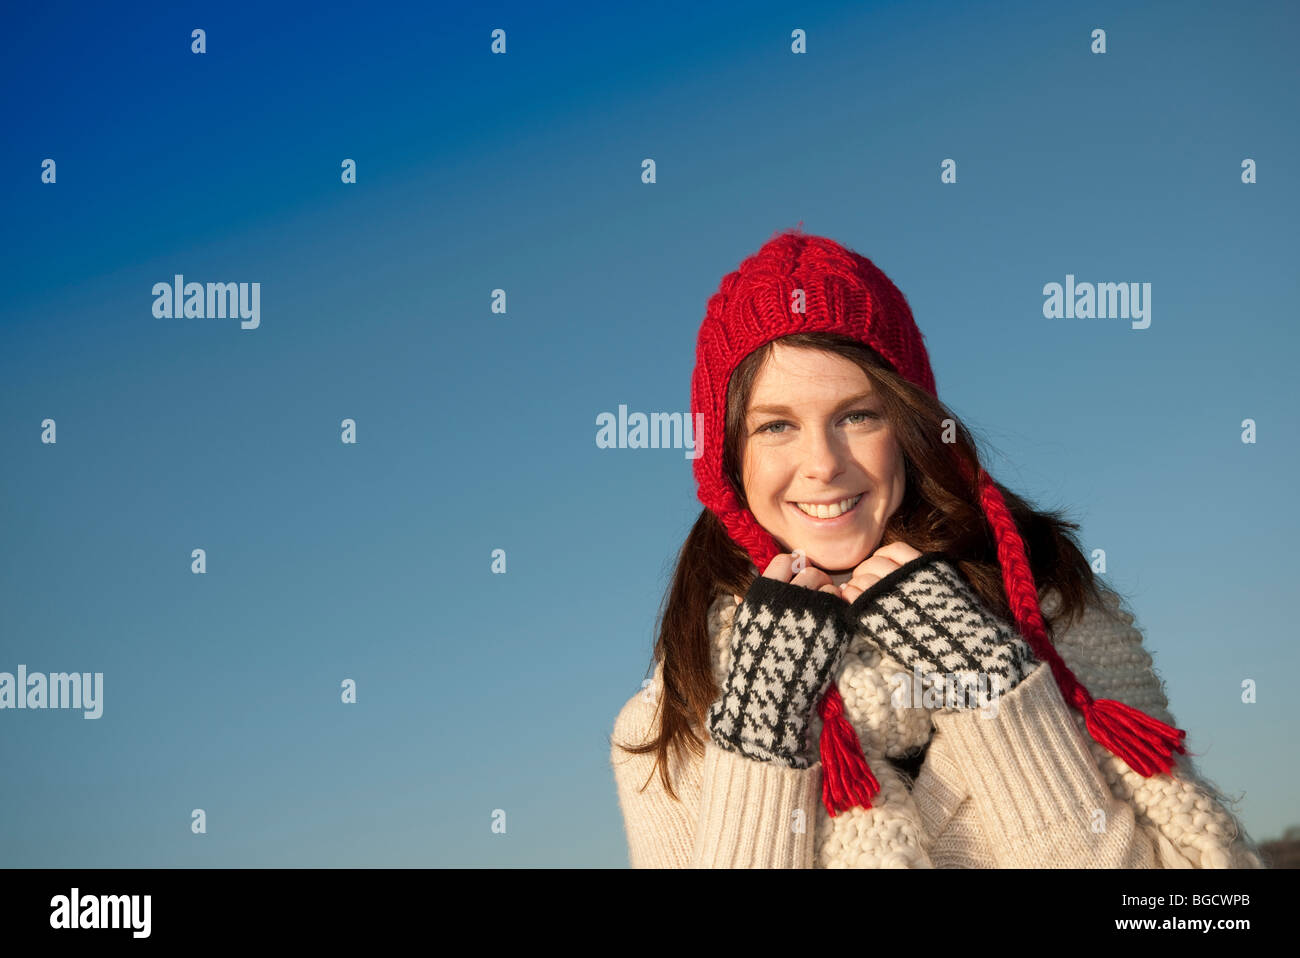 woman wearing a red woolen hat and scarf Stock Photo